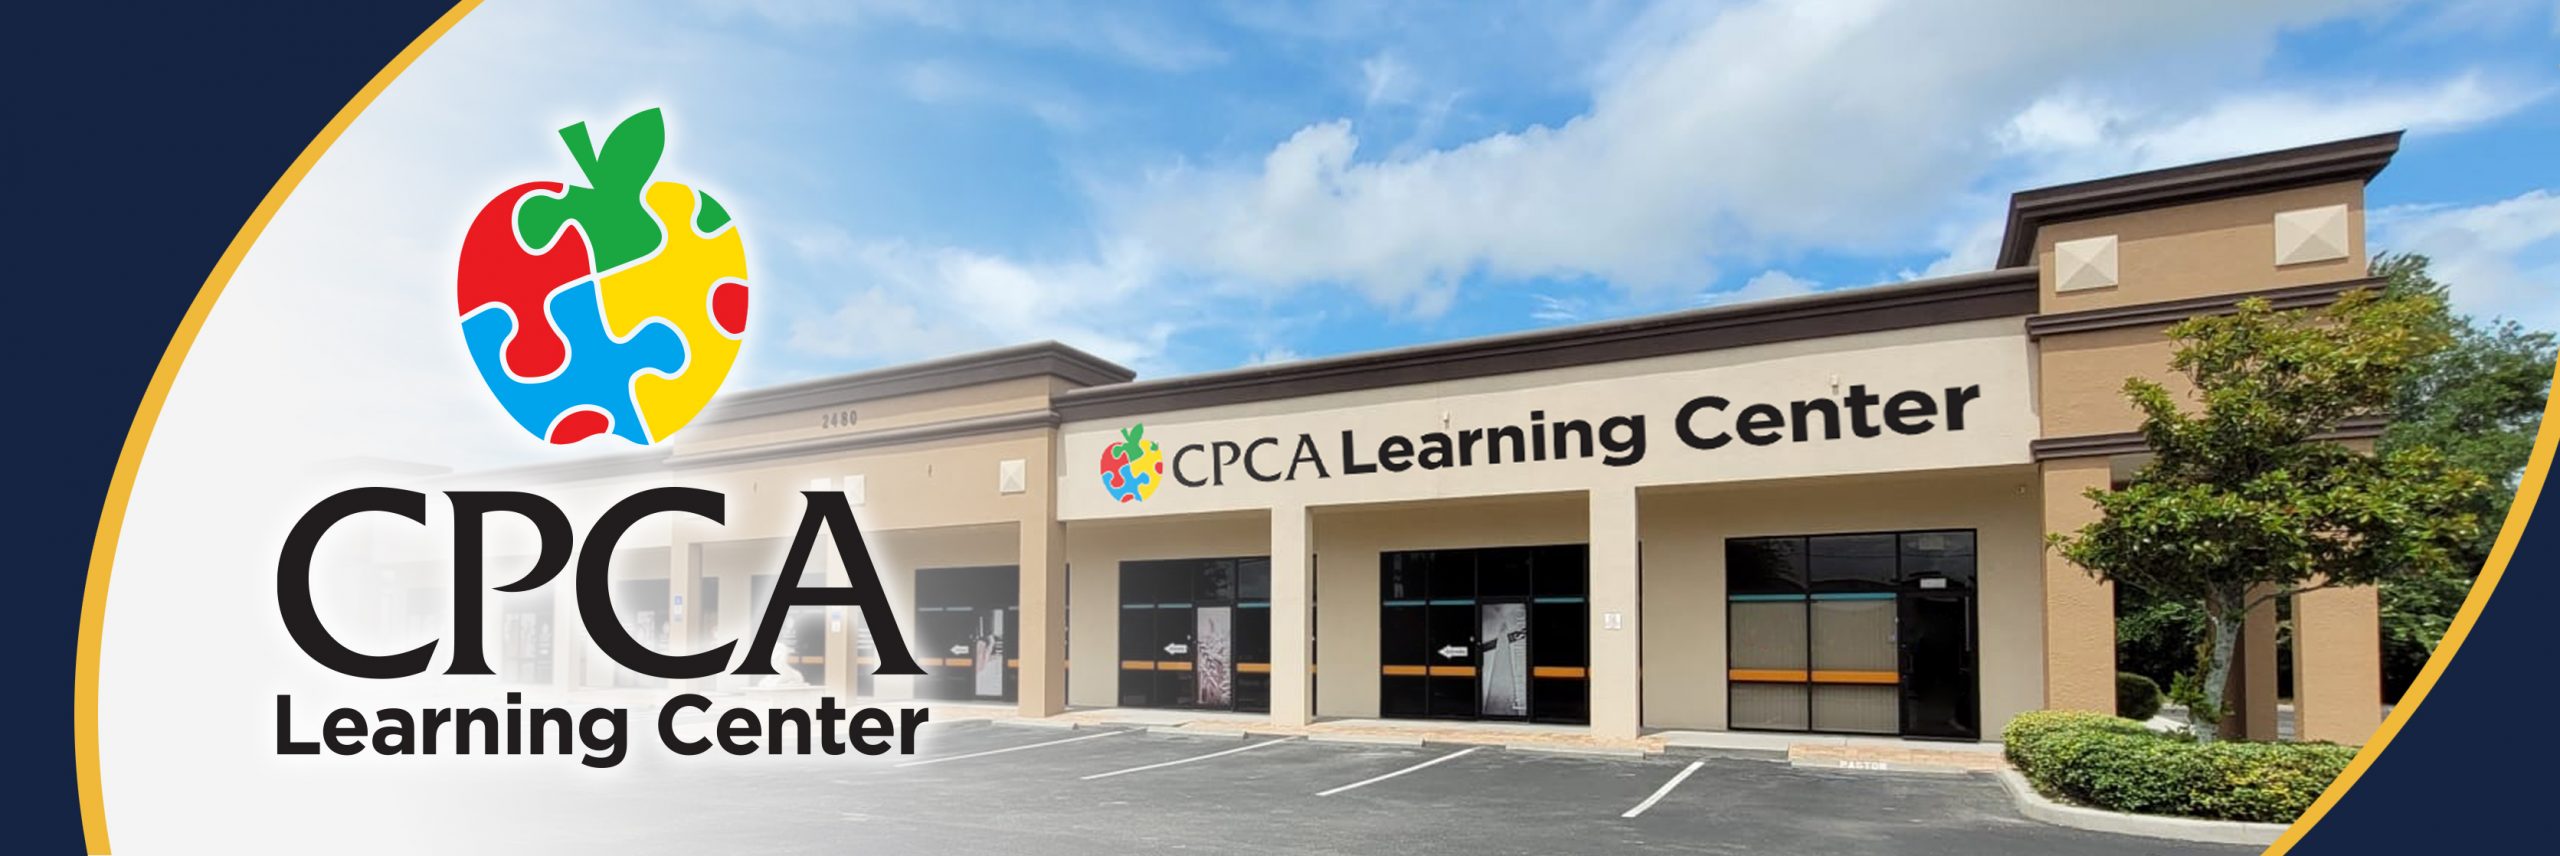 Learning Center CPCA